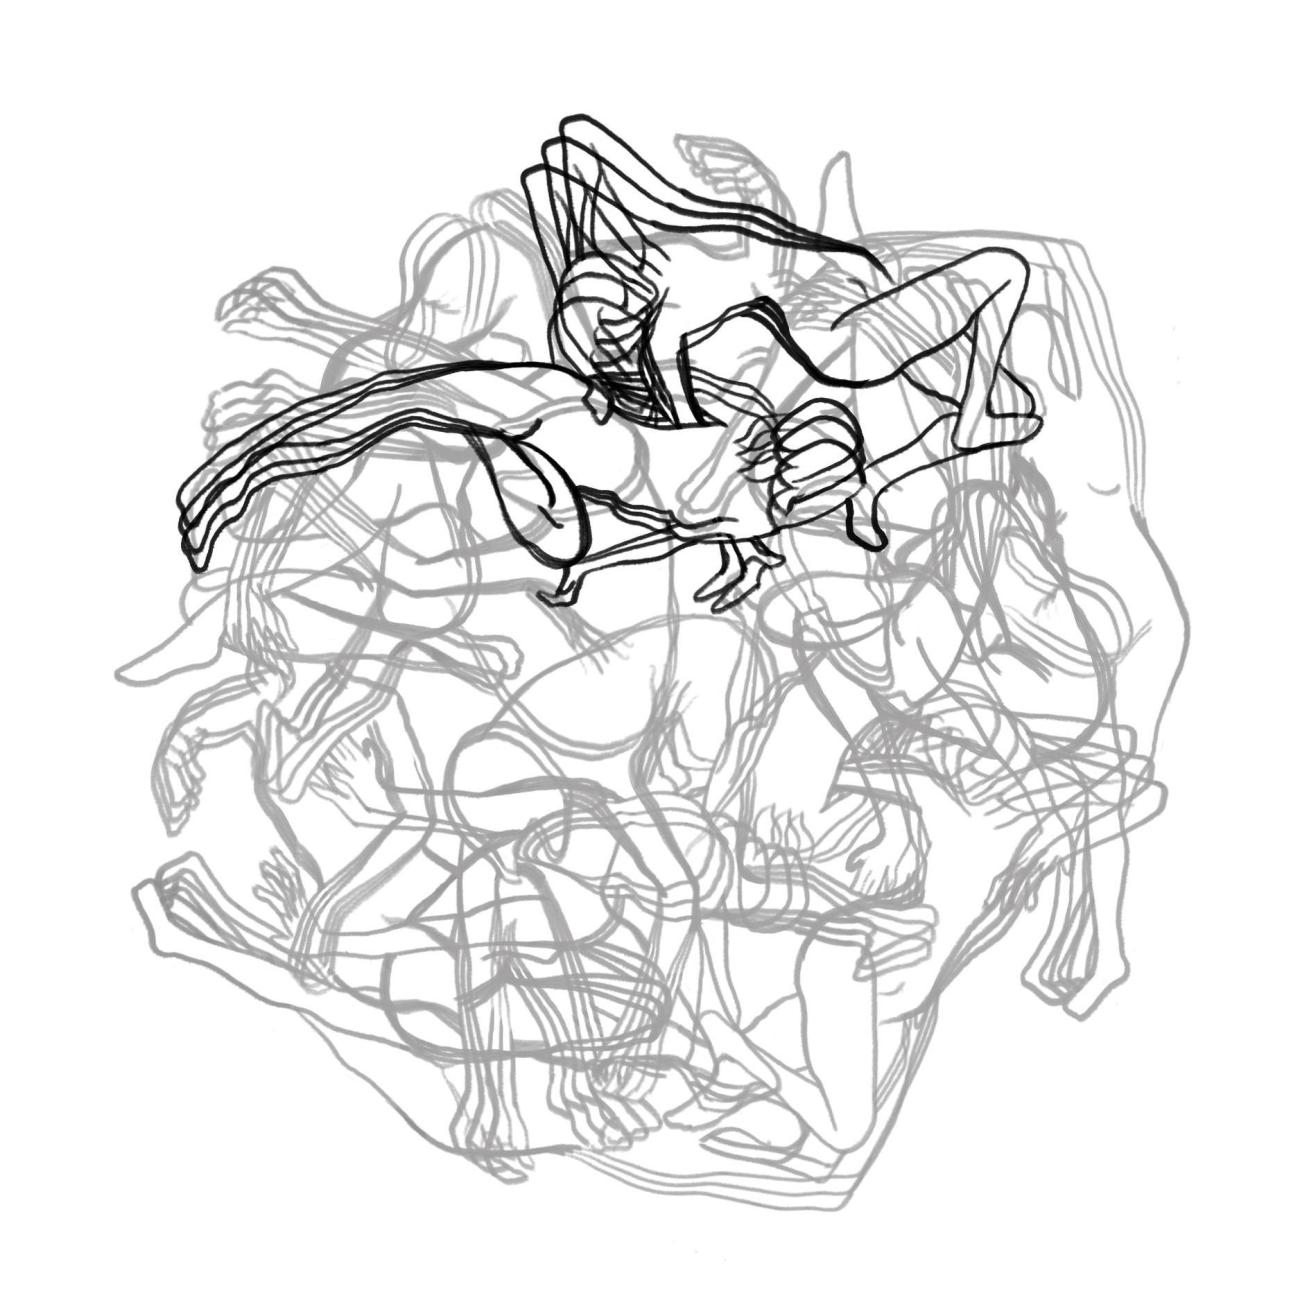 a sketch-like line drawing depicting a palimpsest of moving outlines of bodies